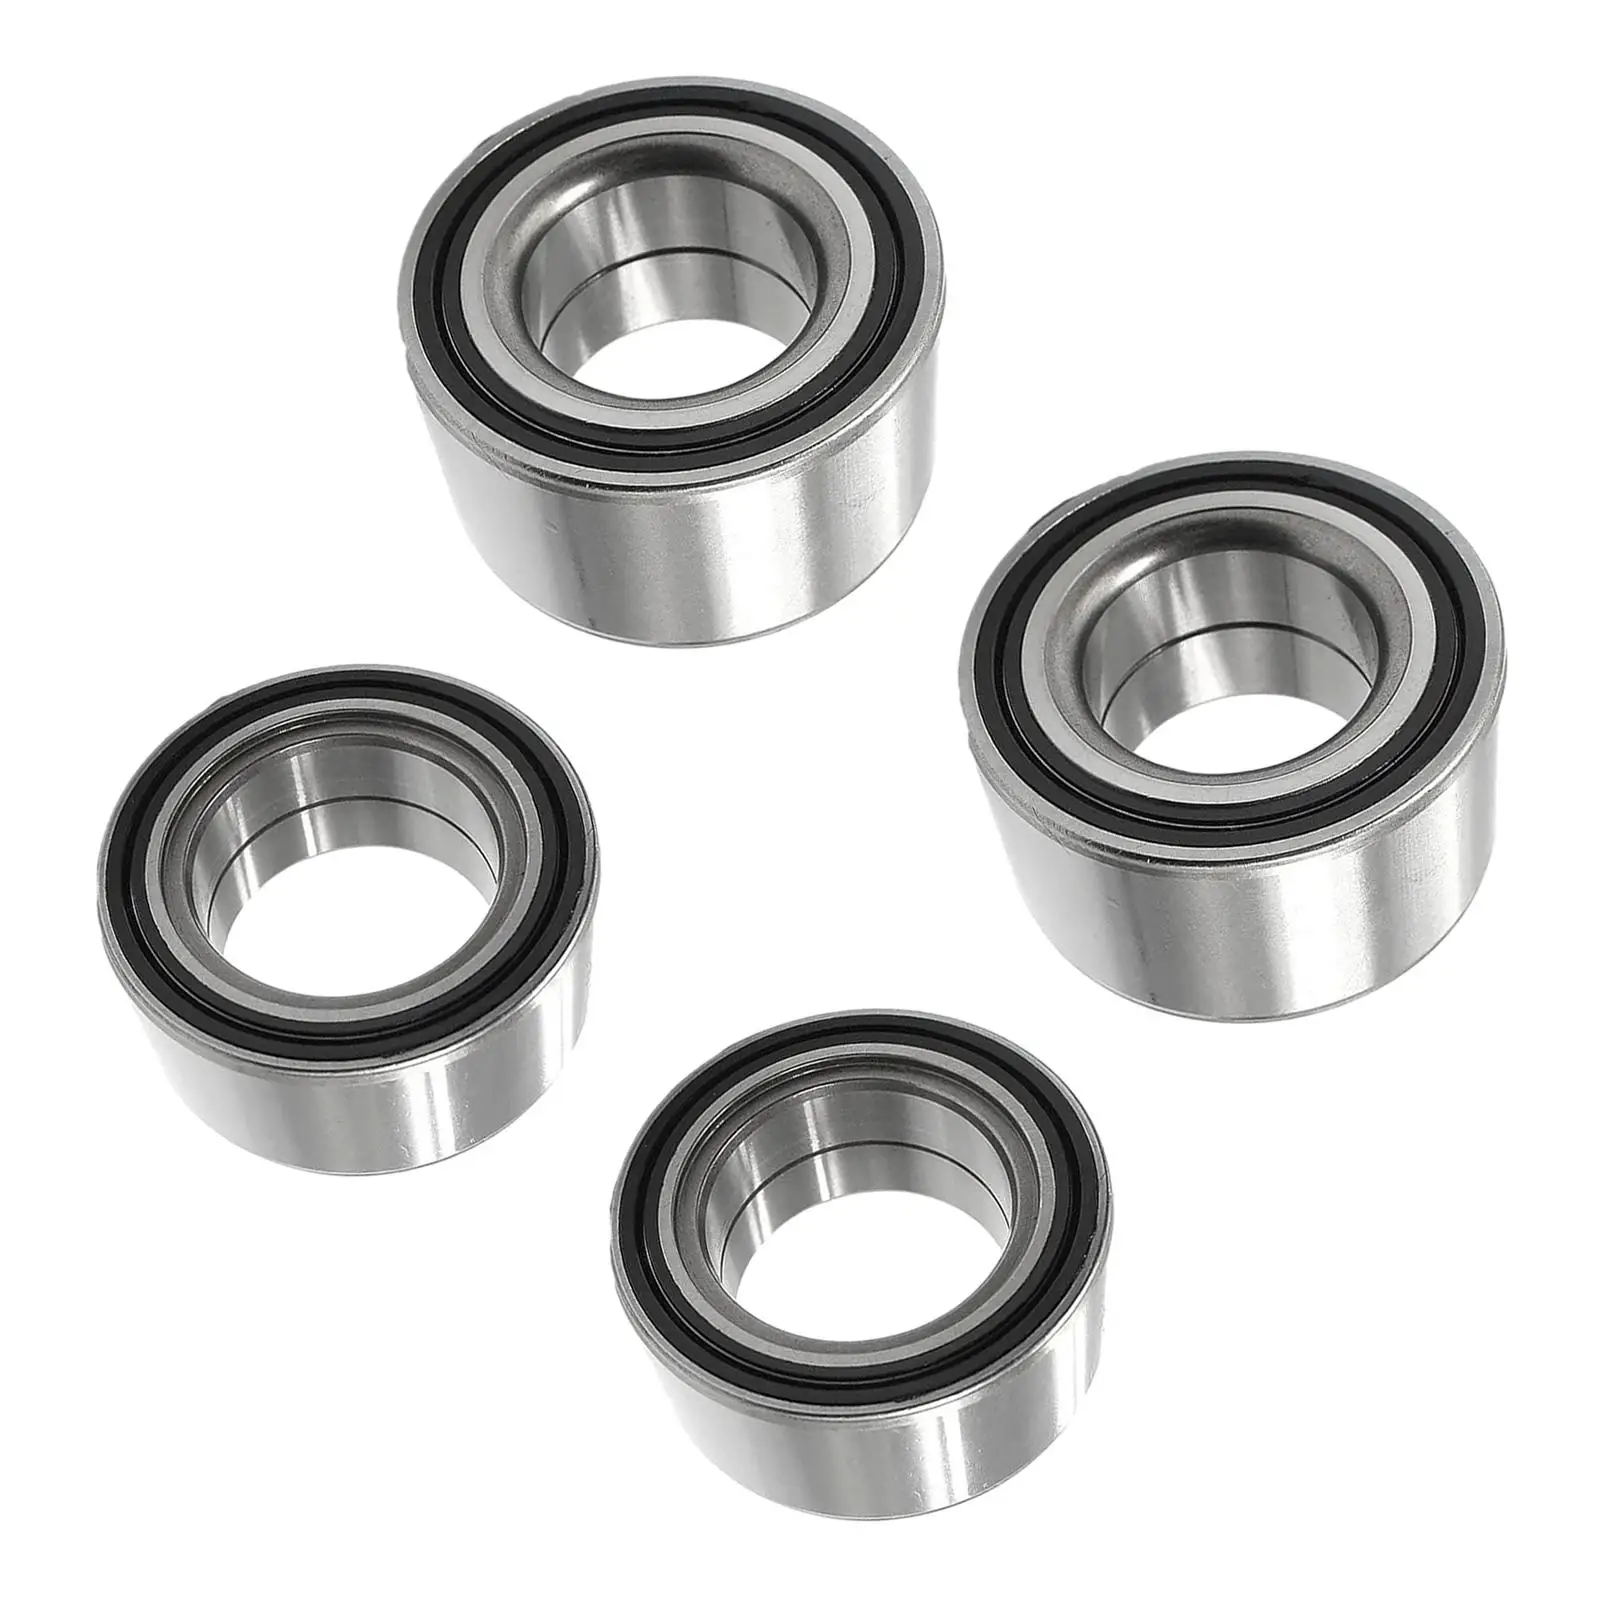 4 Pieces Front and Rear Wheel Bearings 3514699 for Polaris 800 570 Automotive Accessories